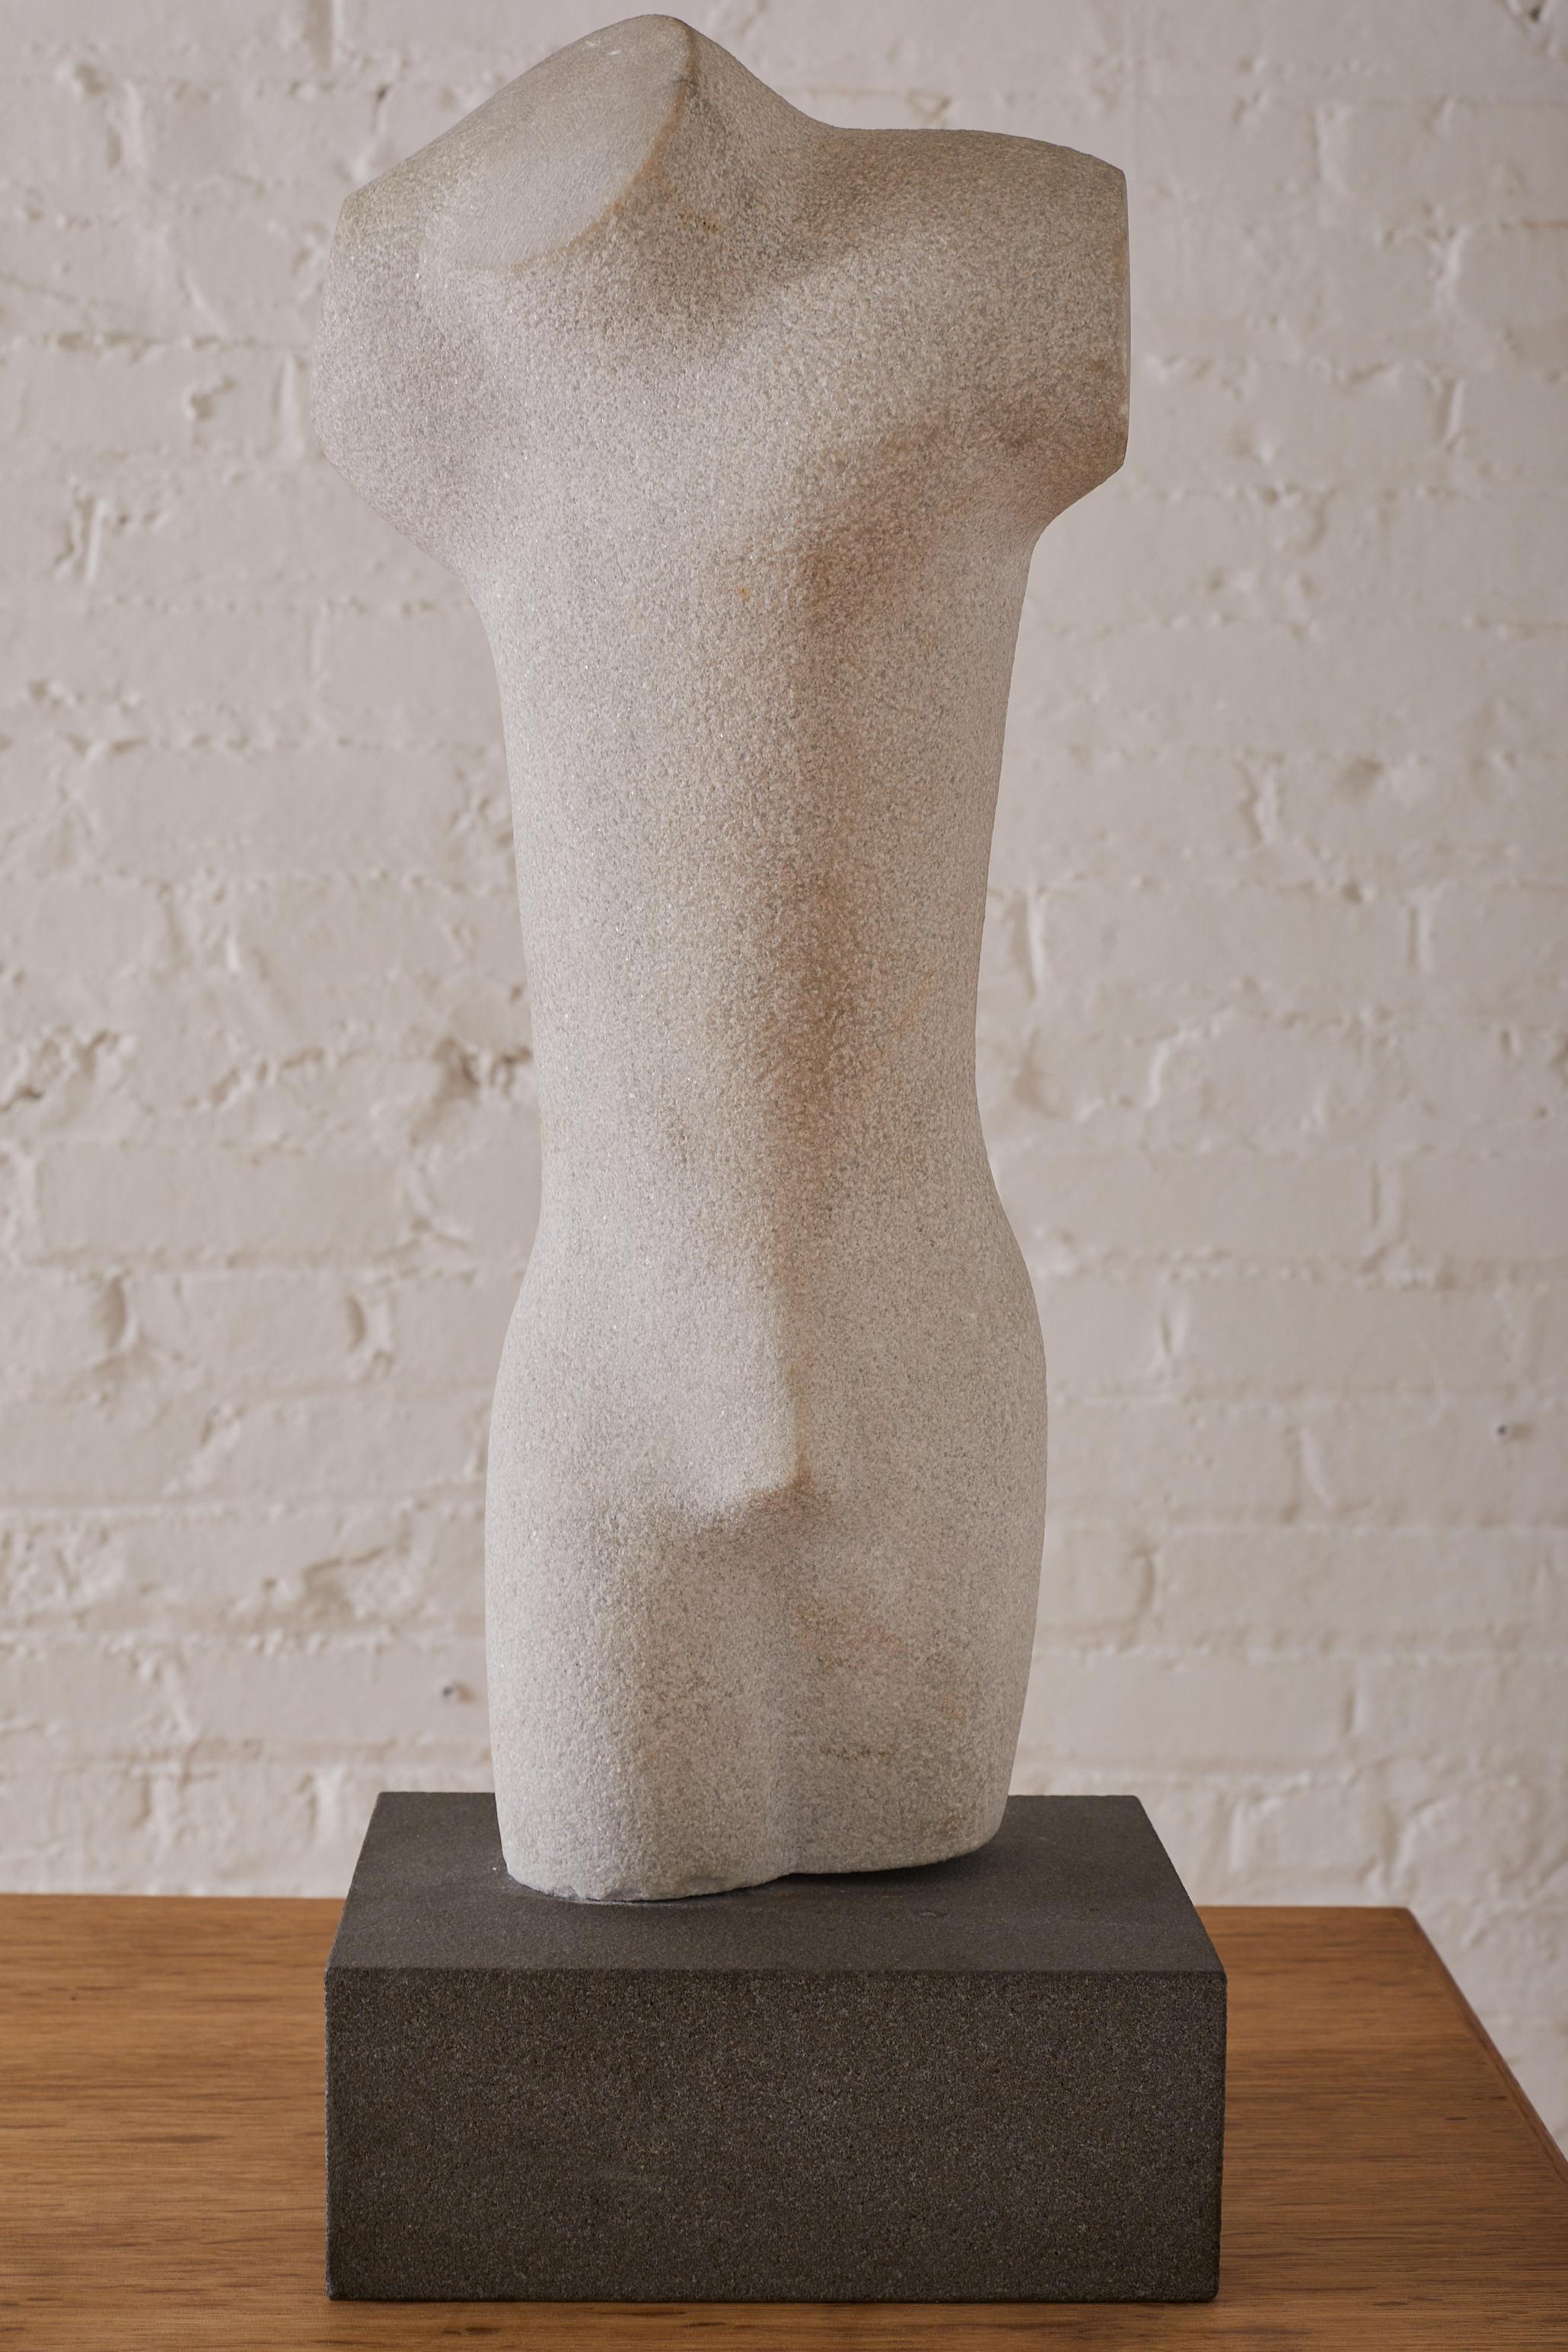 Marble and Granite Carving of Male Torso by American artist Lawrence Glasson (1931-2007) titled 'Man No. 2'. signed on underside of sculpture.